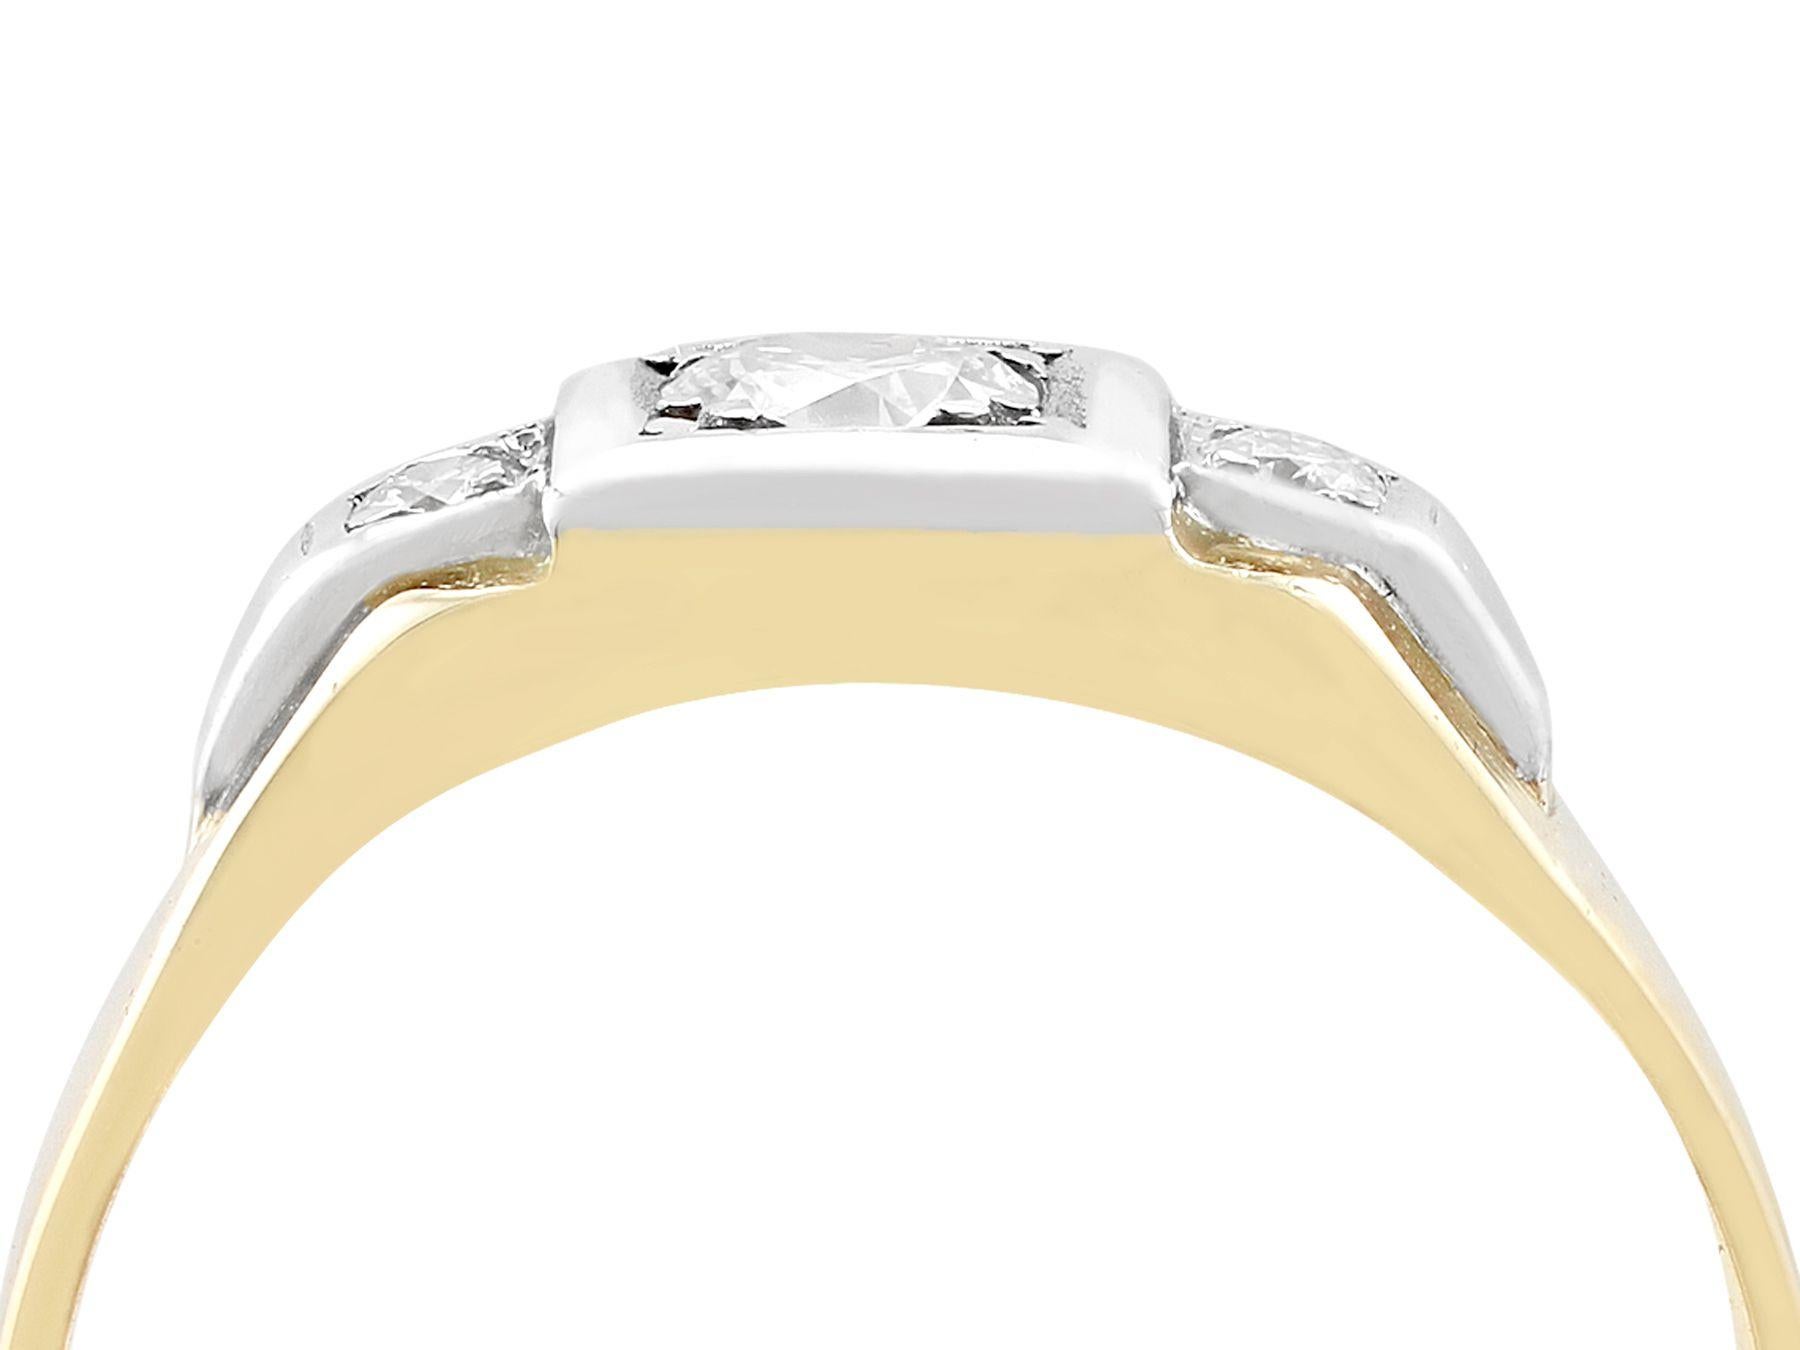 An impressive antique 1930s 0.30 carat diamond and 18 karat yellow gold, platinum set trilogy style dress ring; part of our diverse antique jewelry and estate jewelry collections.

This fine and impressive antique diamond dress ring has been crafted